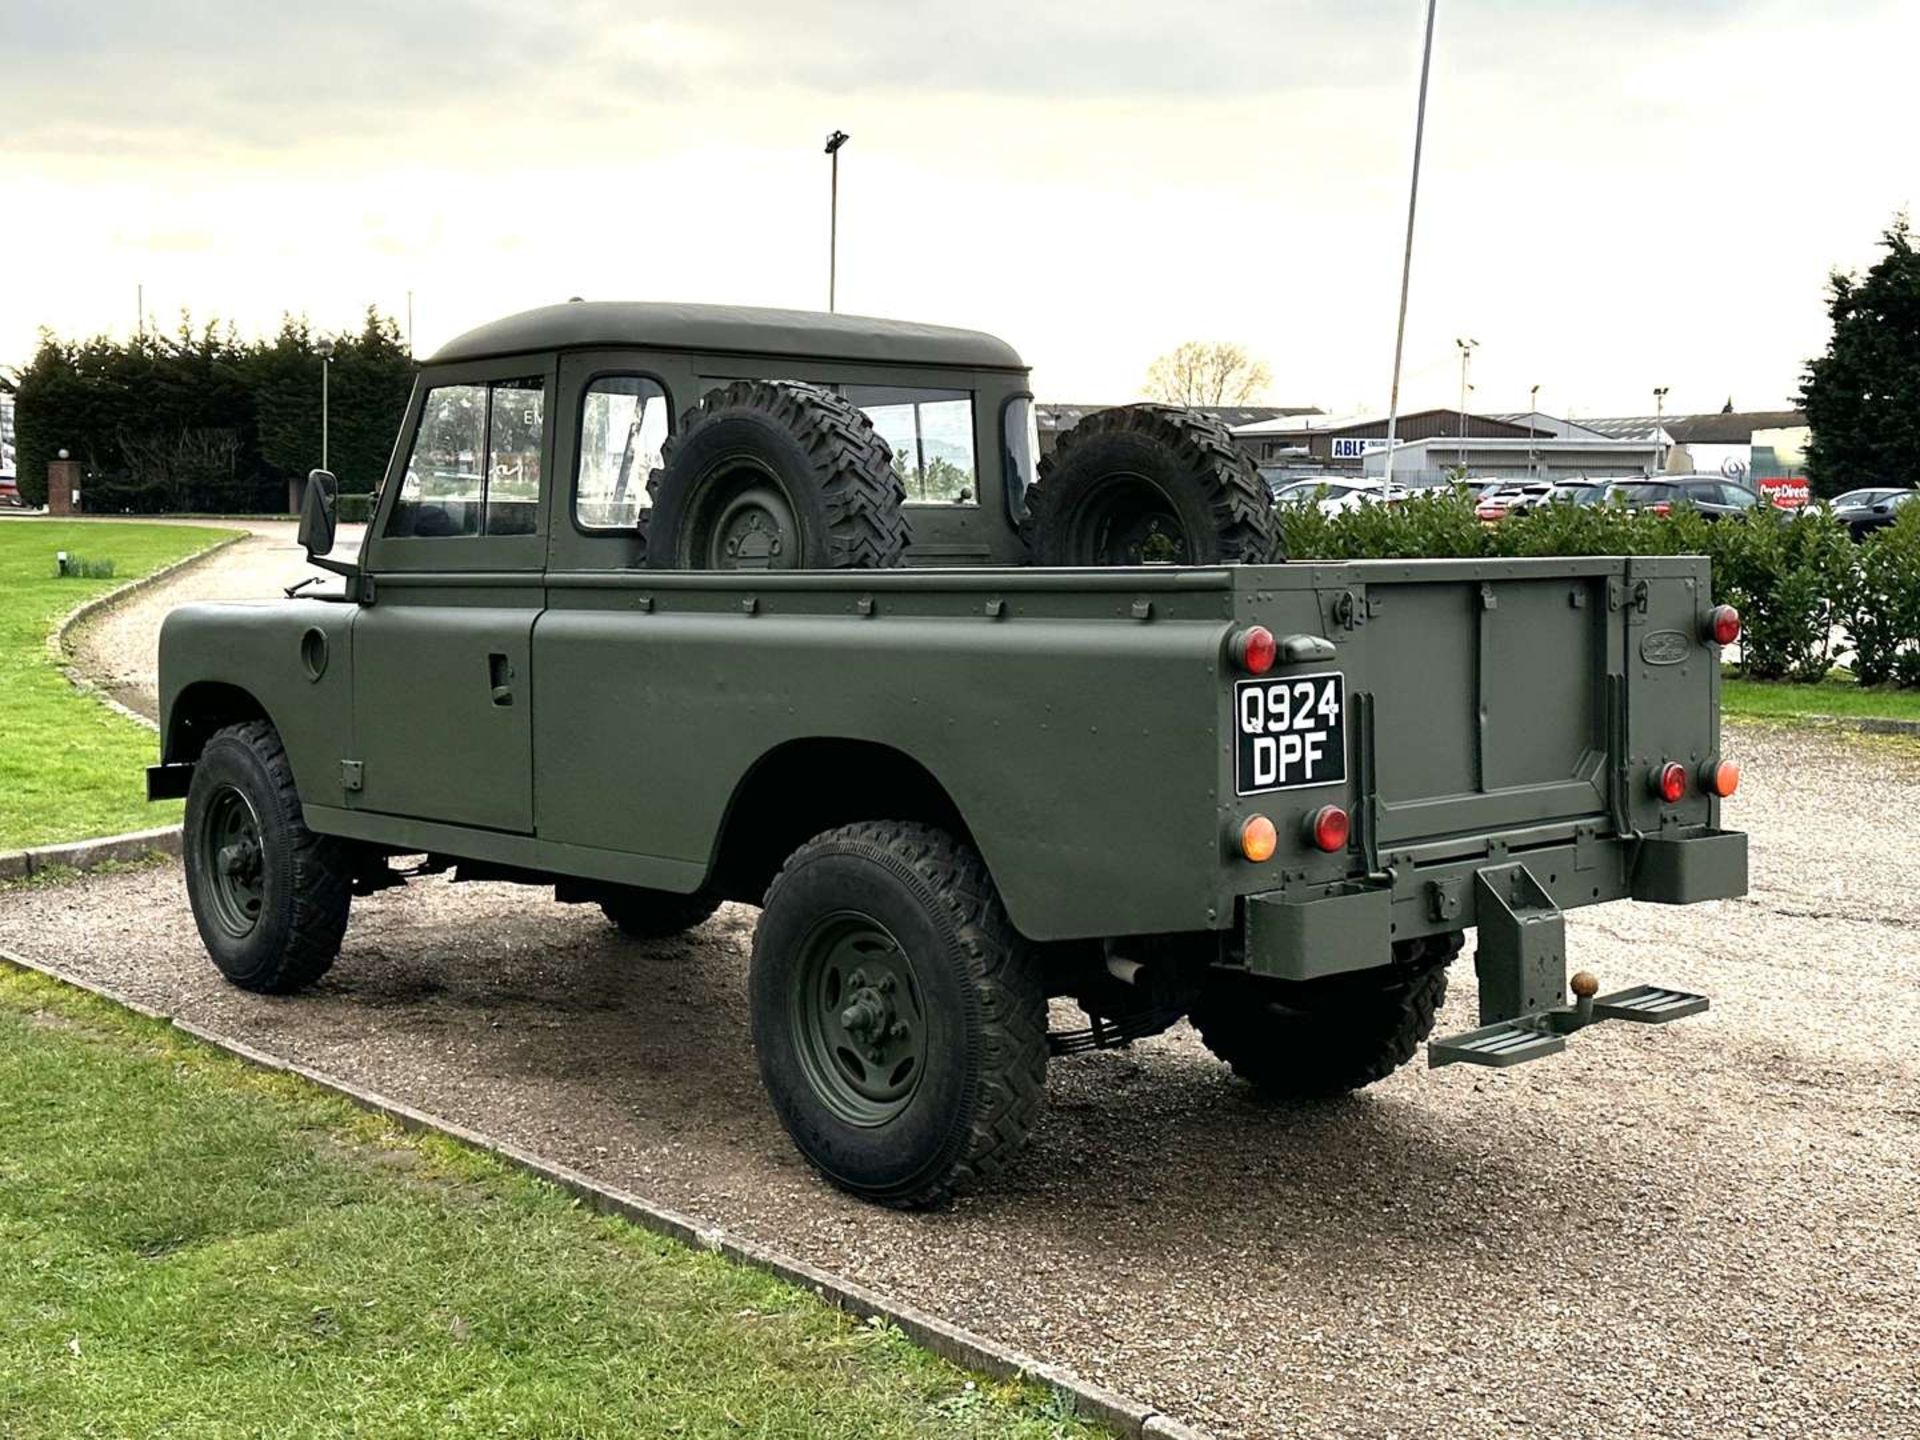 1992 LAND ROVER SERIES III PICK-UP - Image 5 of 25